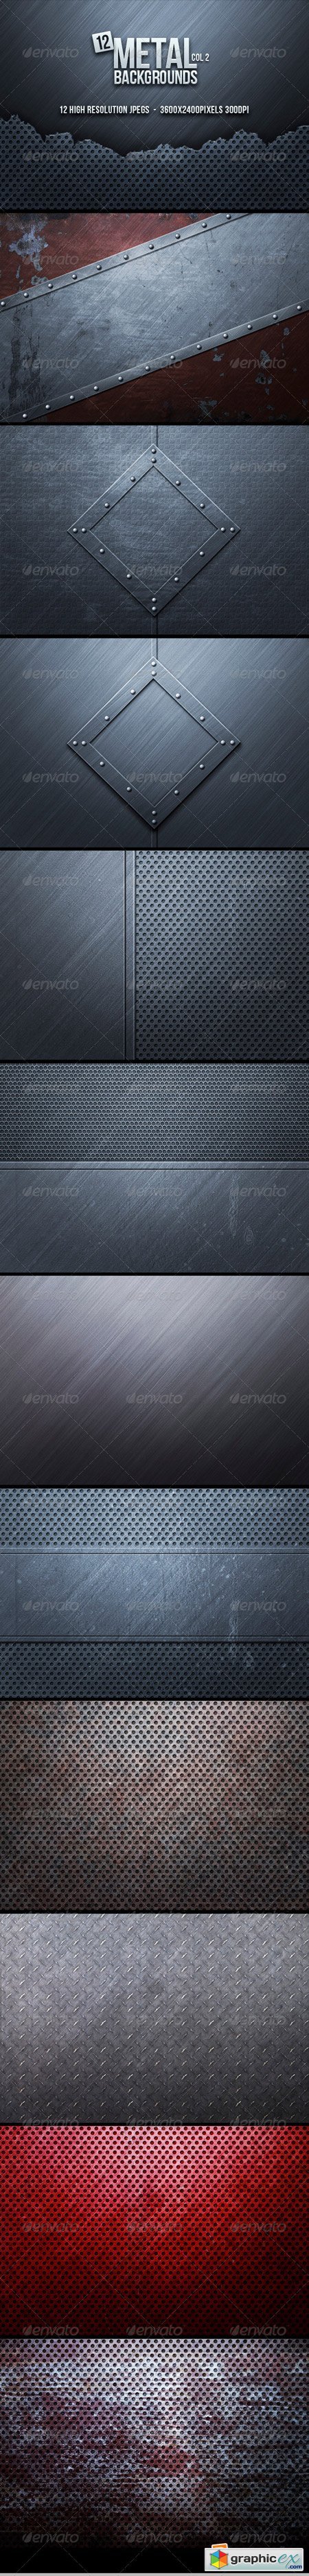 Metal Backgrounds Col2